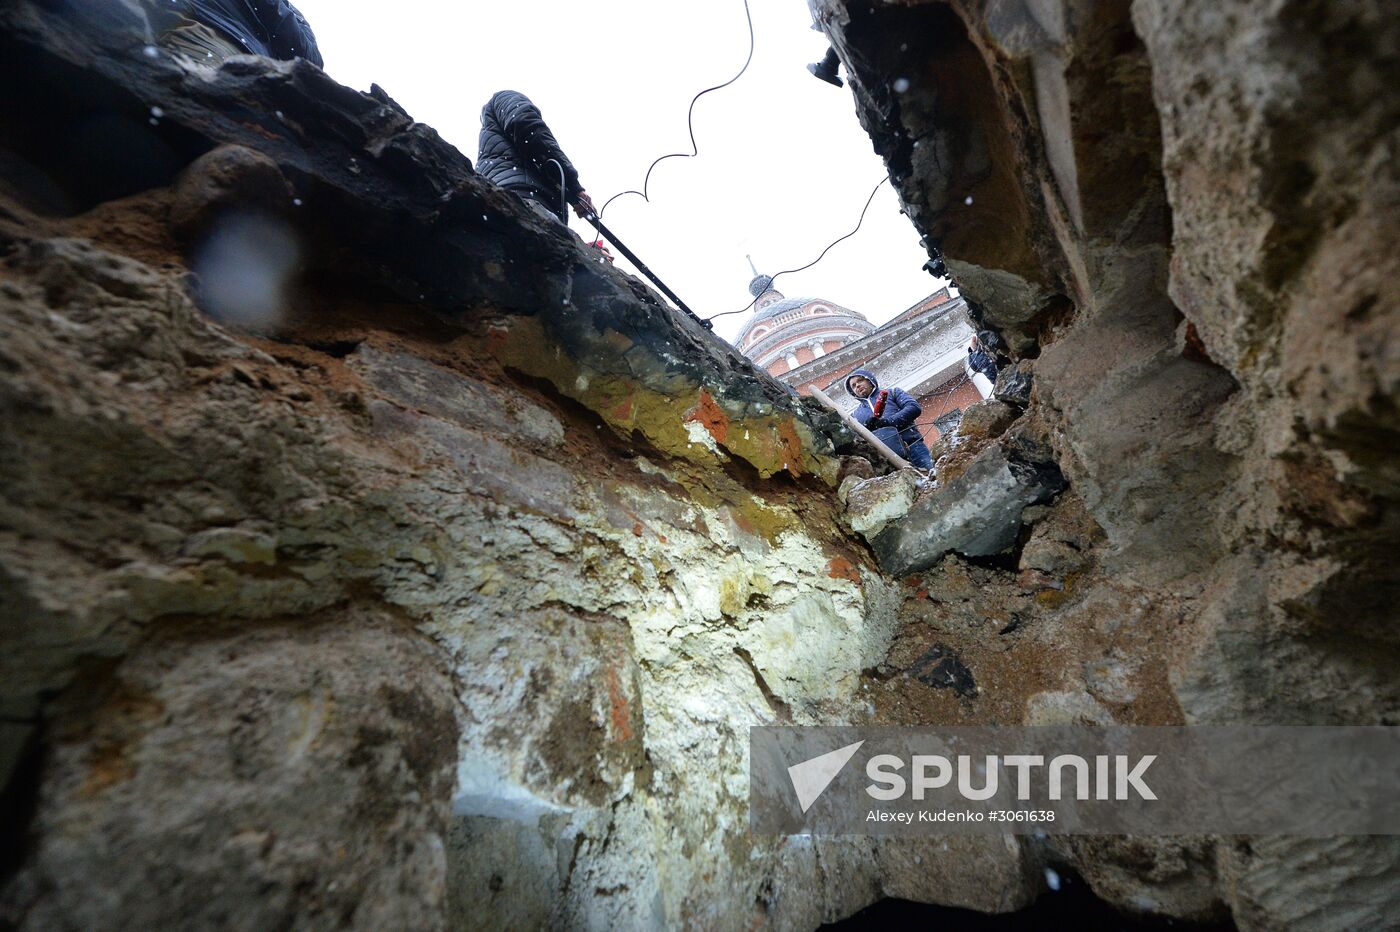 Secret underground chamber unearthed in downtown Moscow